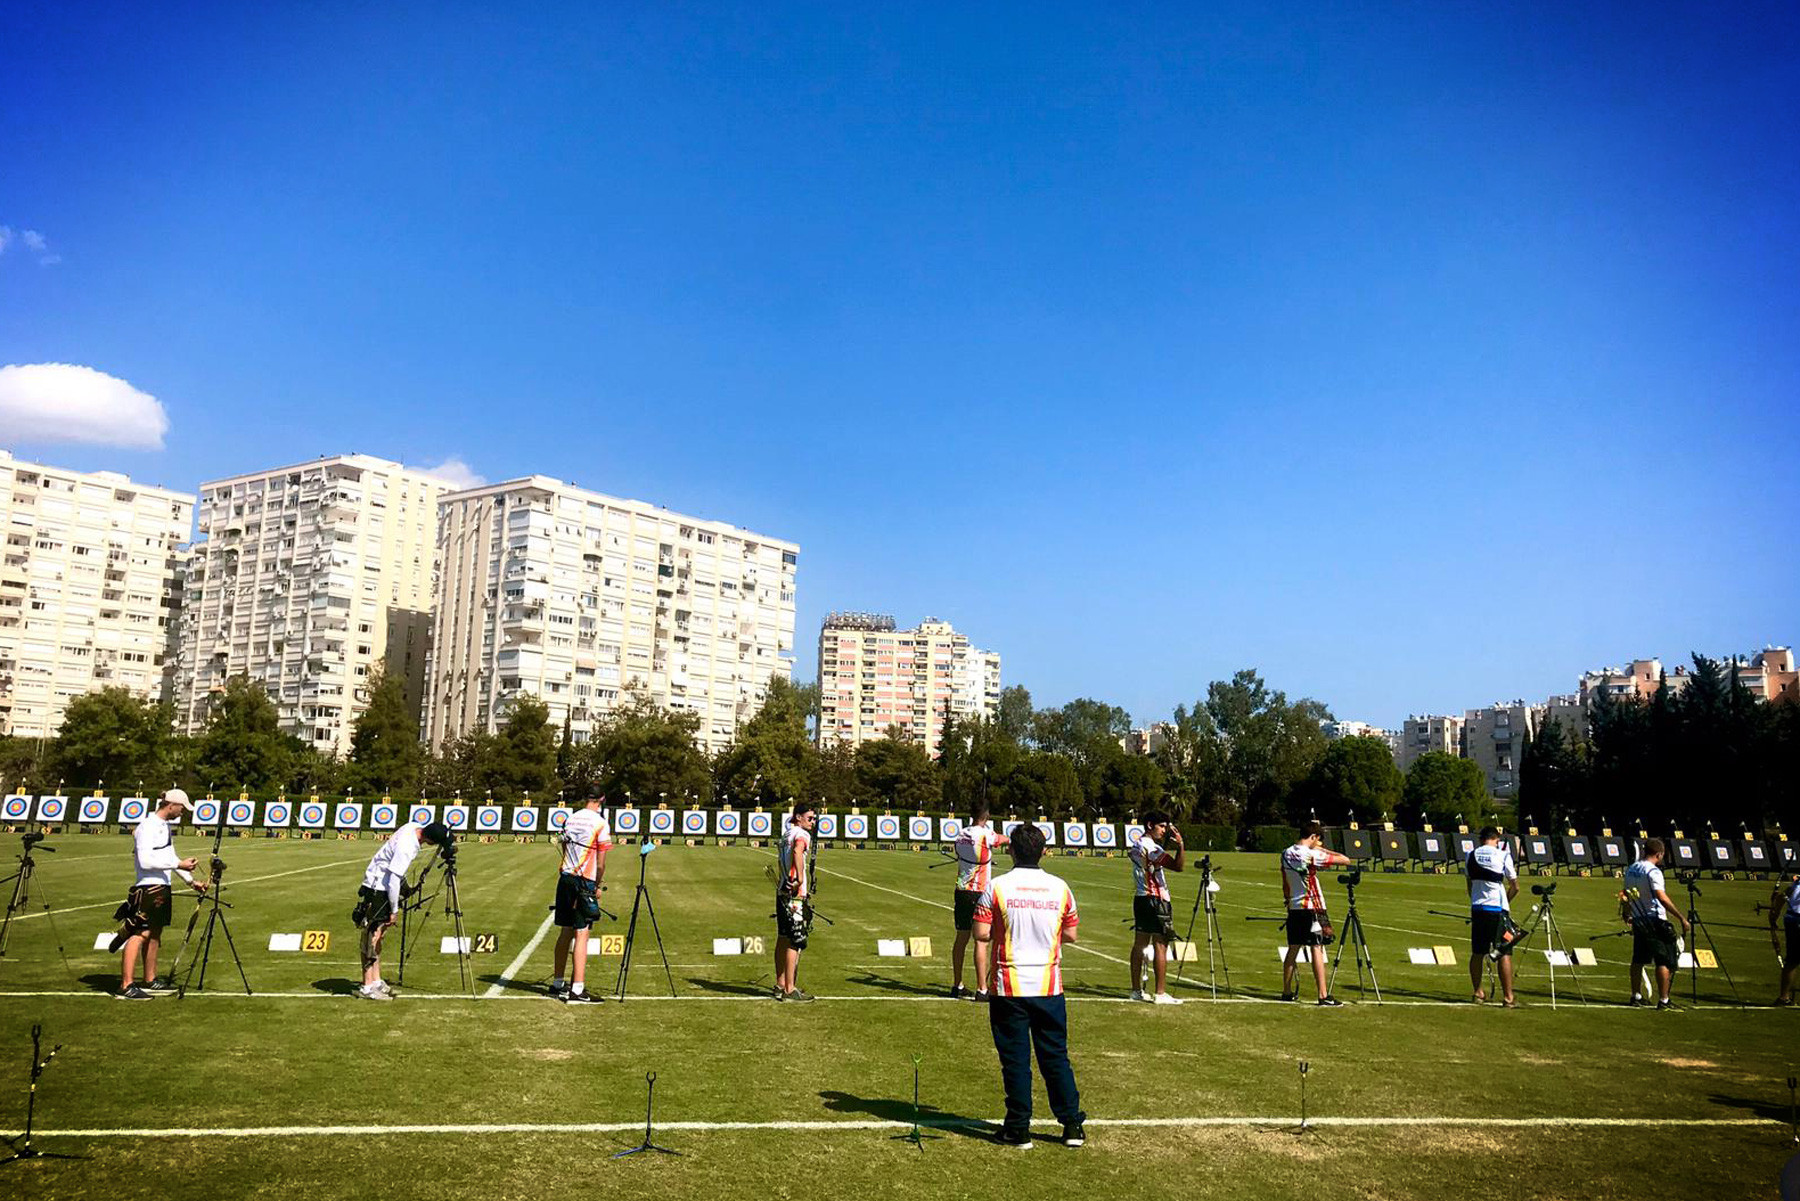 Antalya is currently hosting archery’s first world ranking event since the start of coronavirus pandemic ©World Archery